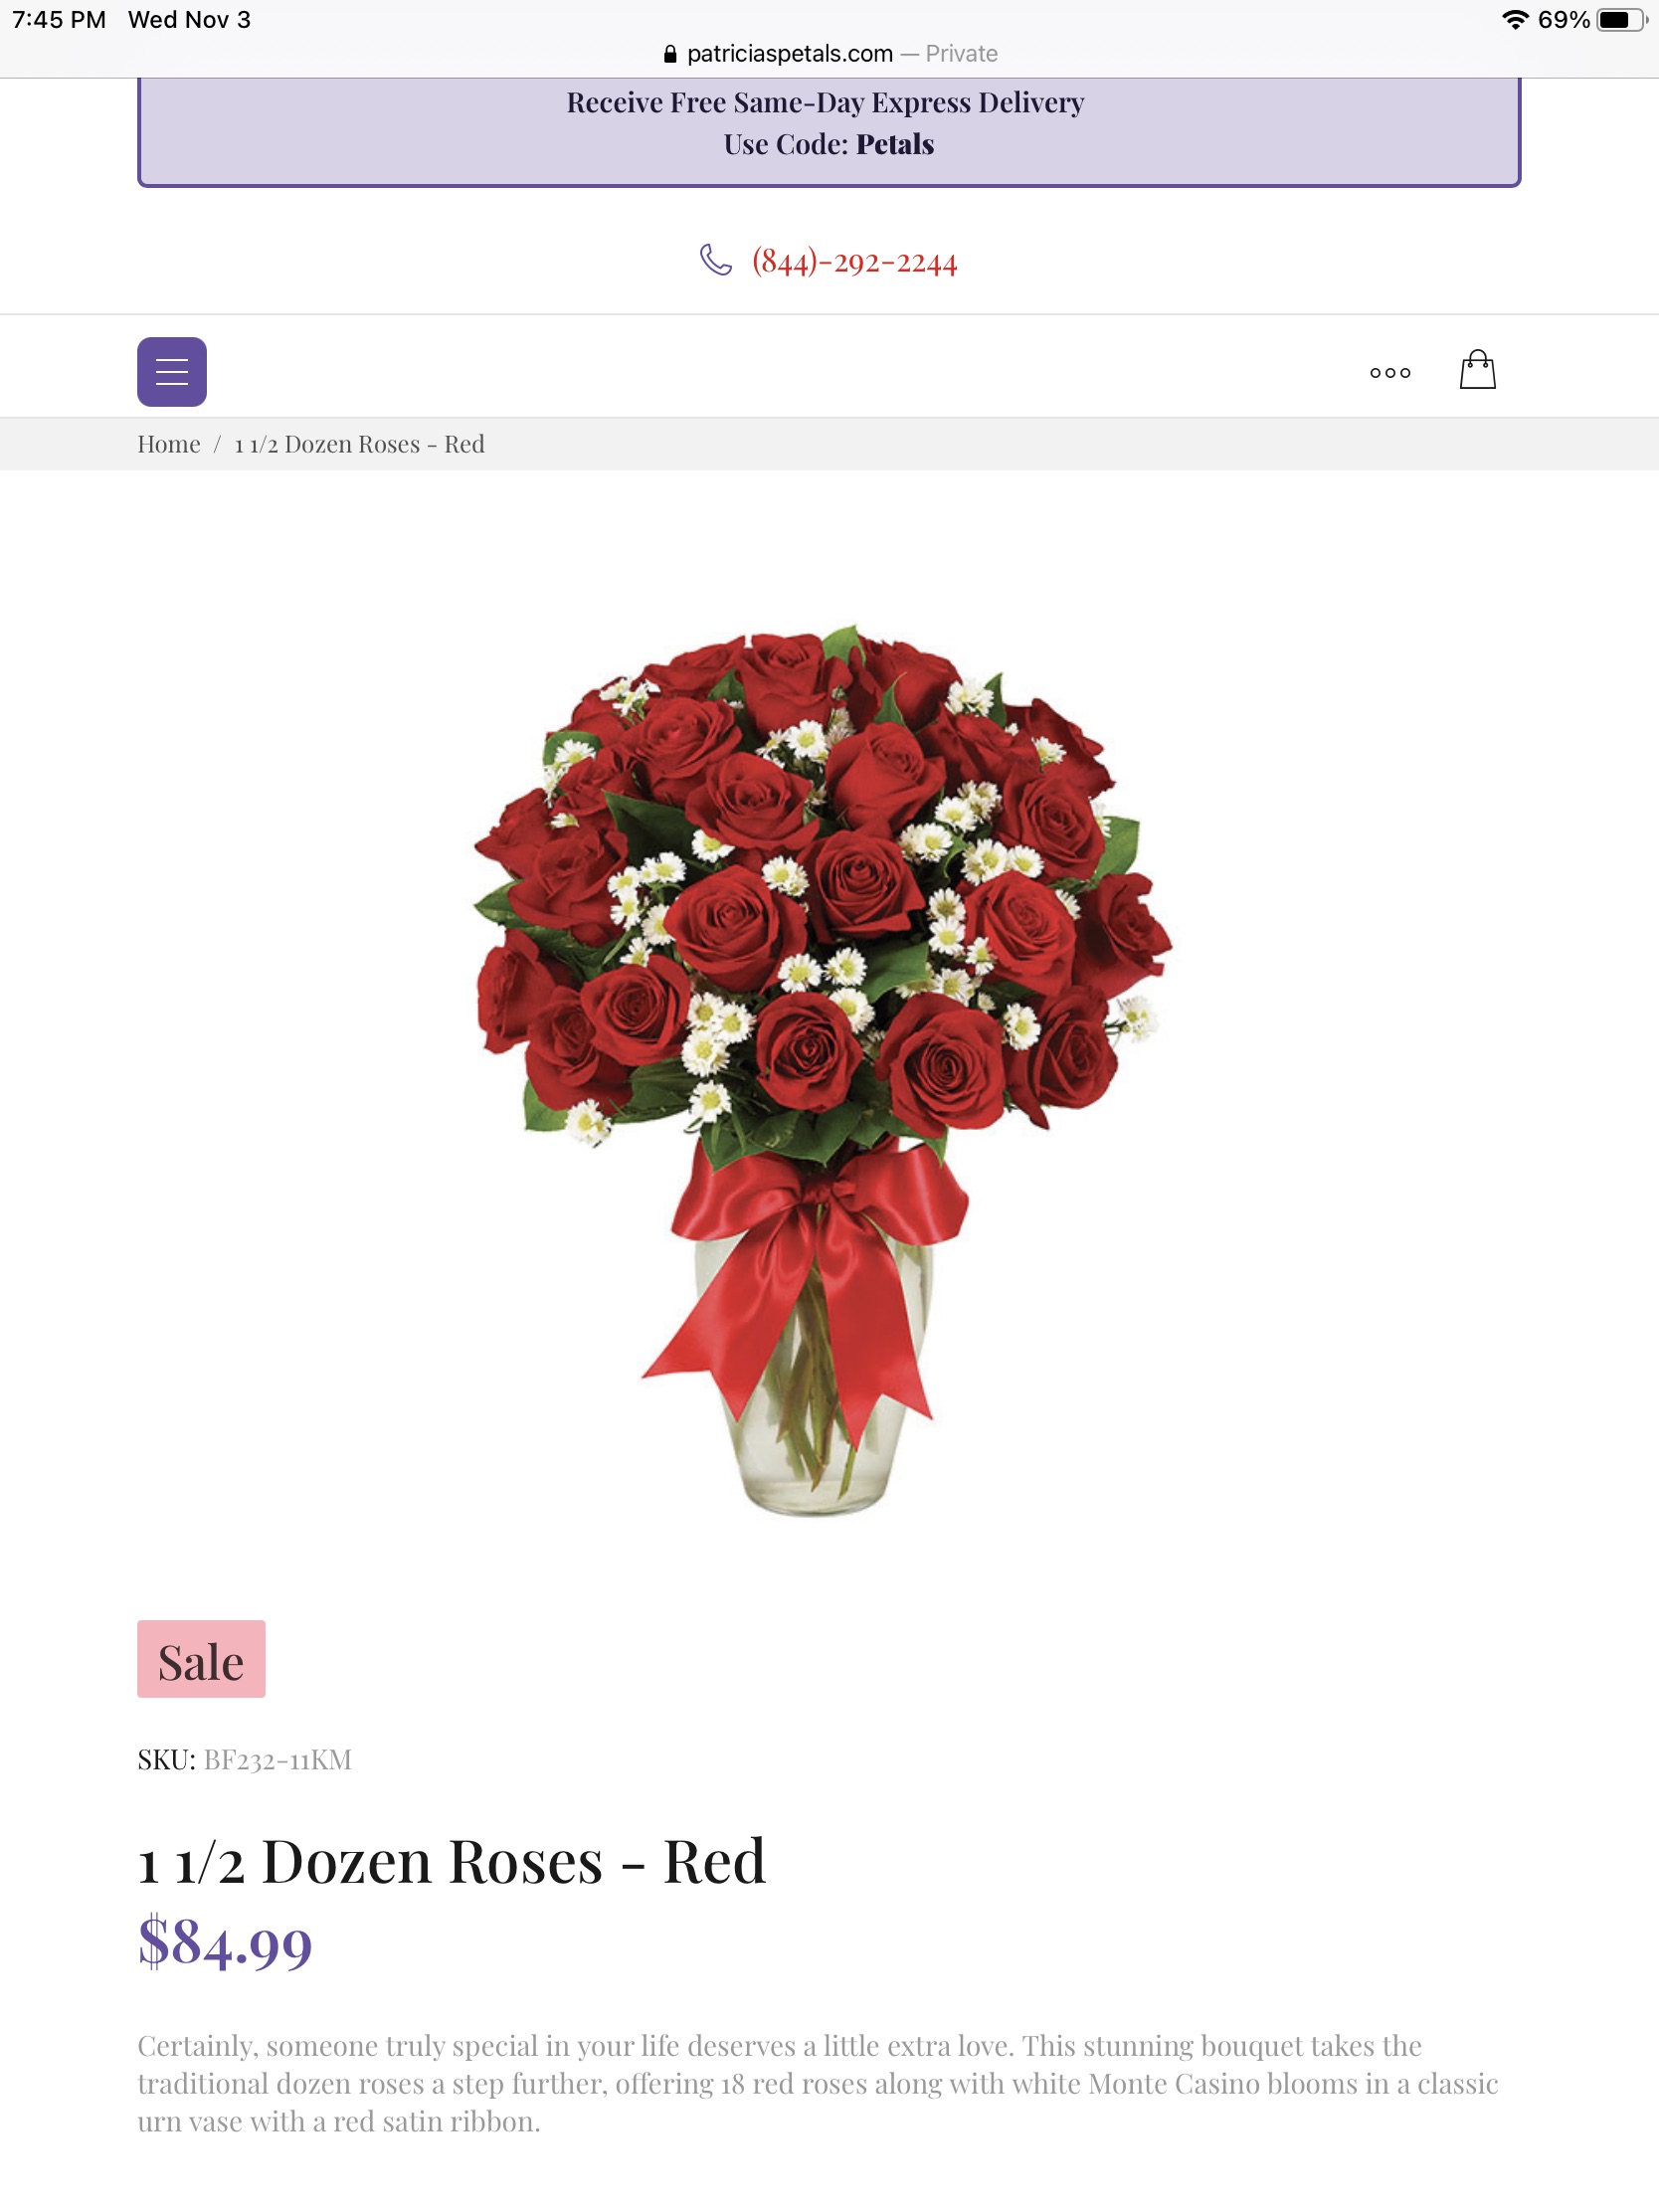 This is the order for red roses, Deluxe $94.99